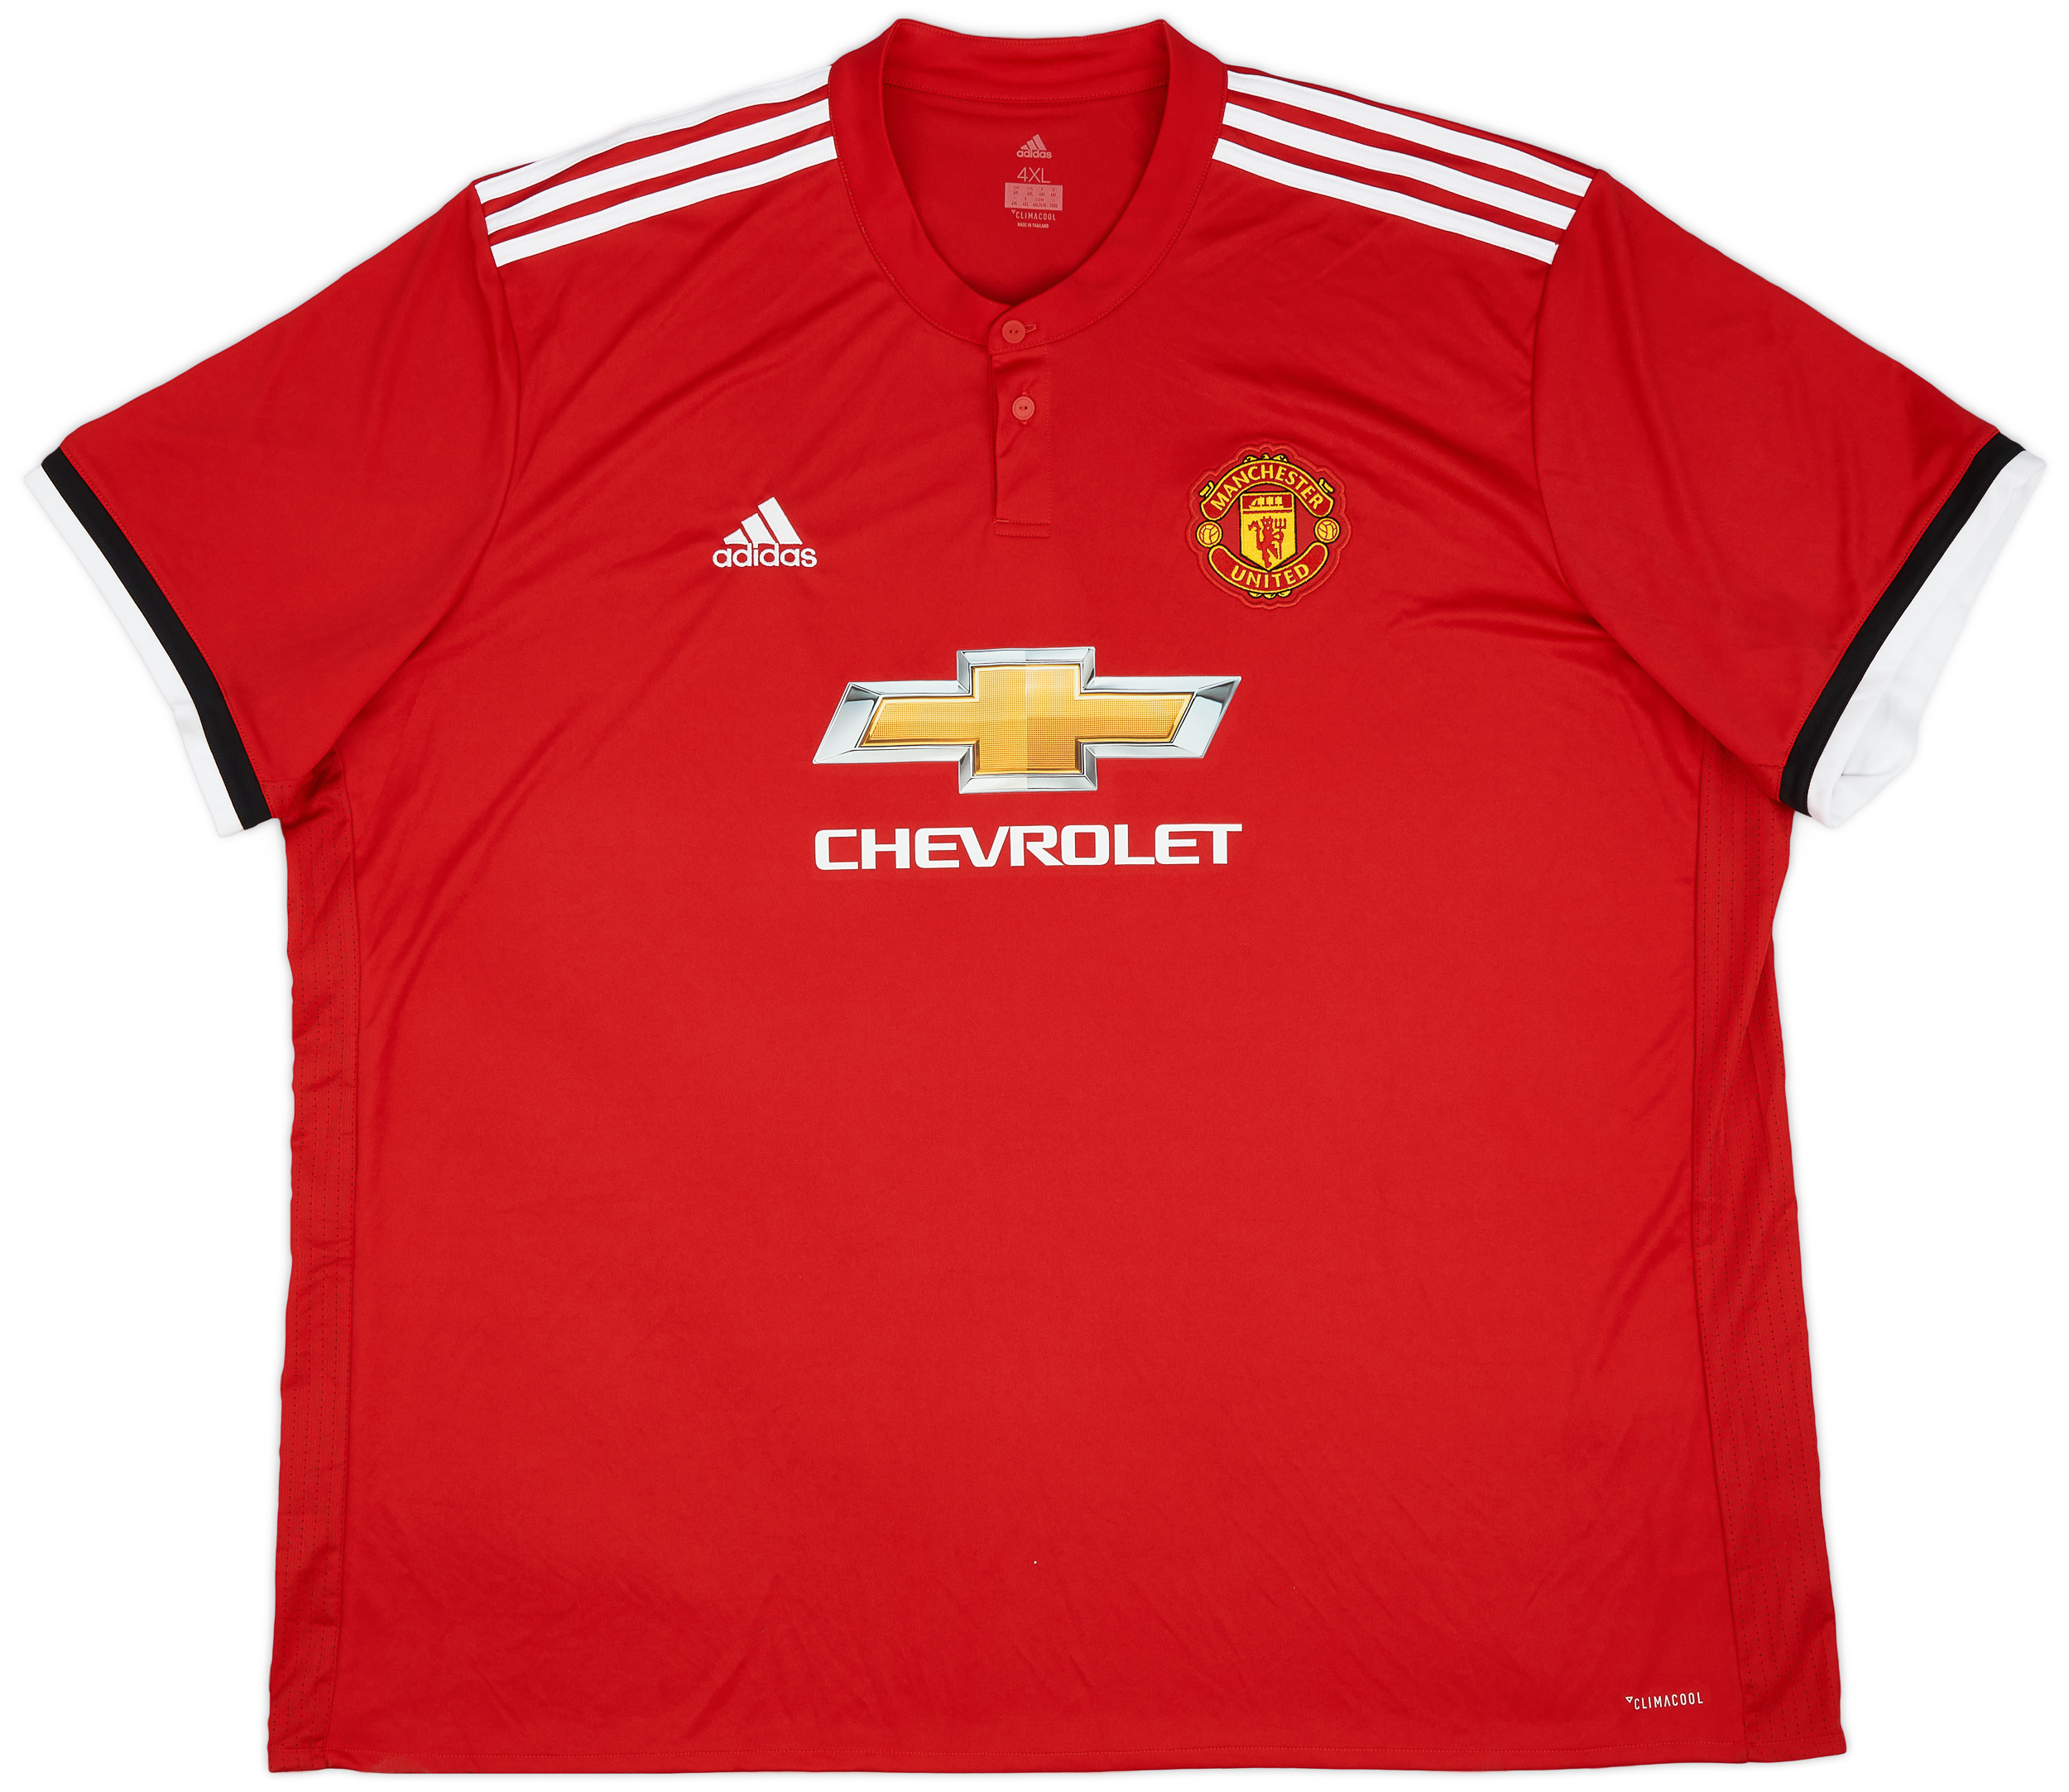 2017-18 Manchester United Home Shirt - 10/10 - ()